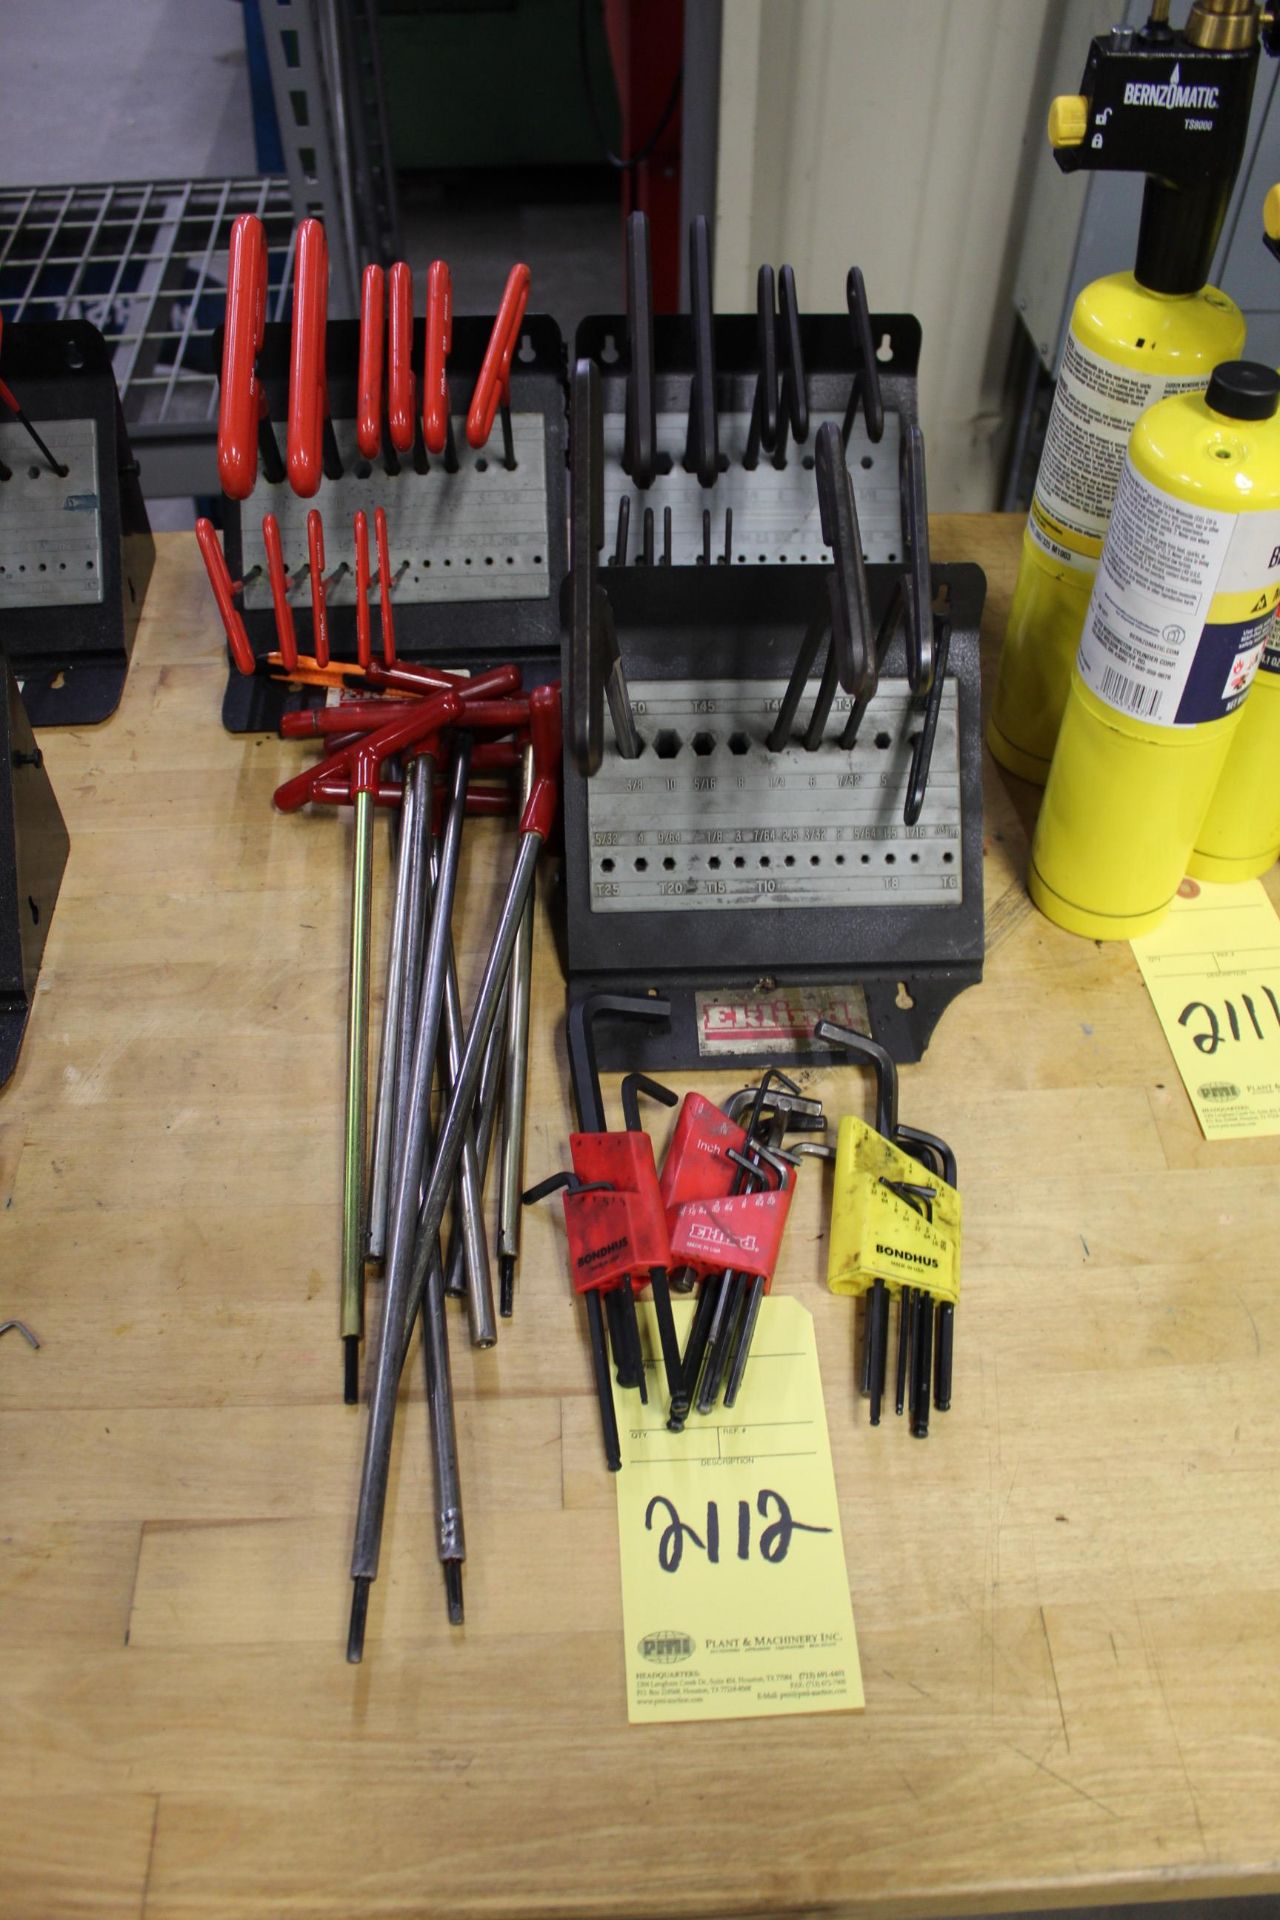 LOT OF T-HANDLE ALLAN WRENCHES (Located at: Langham Creek Machine Works, 37470 FM 529, Brookshire,